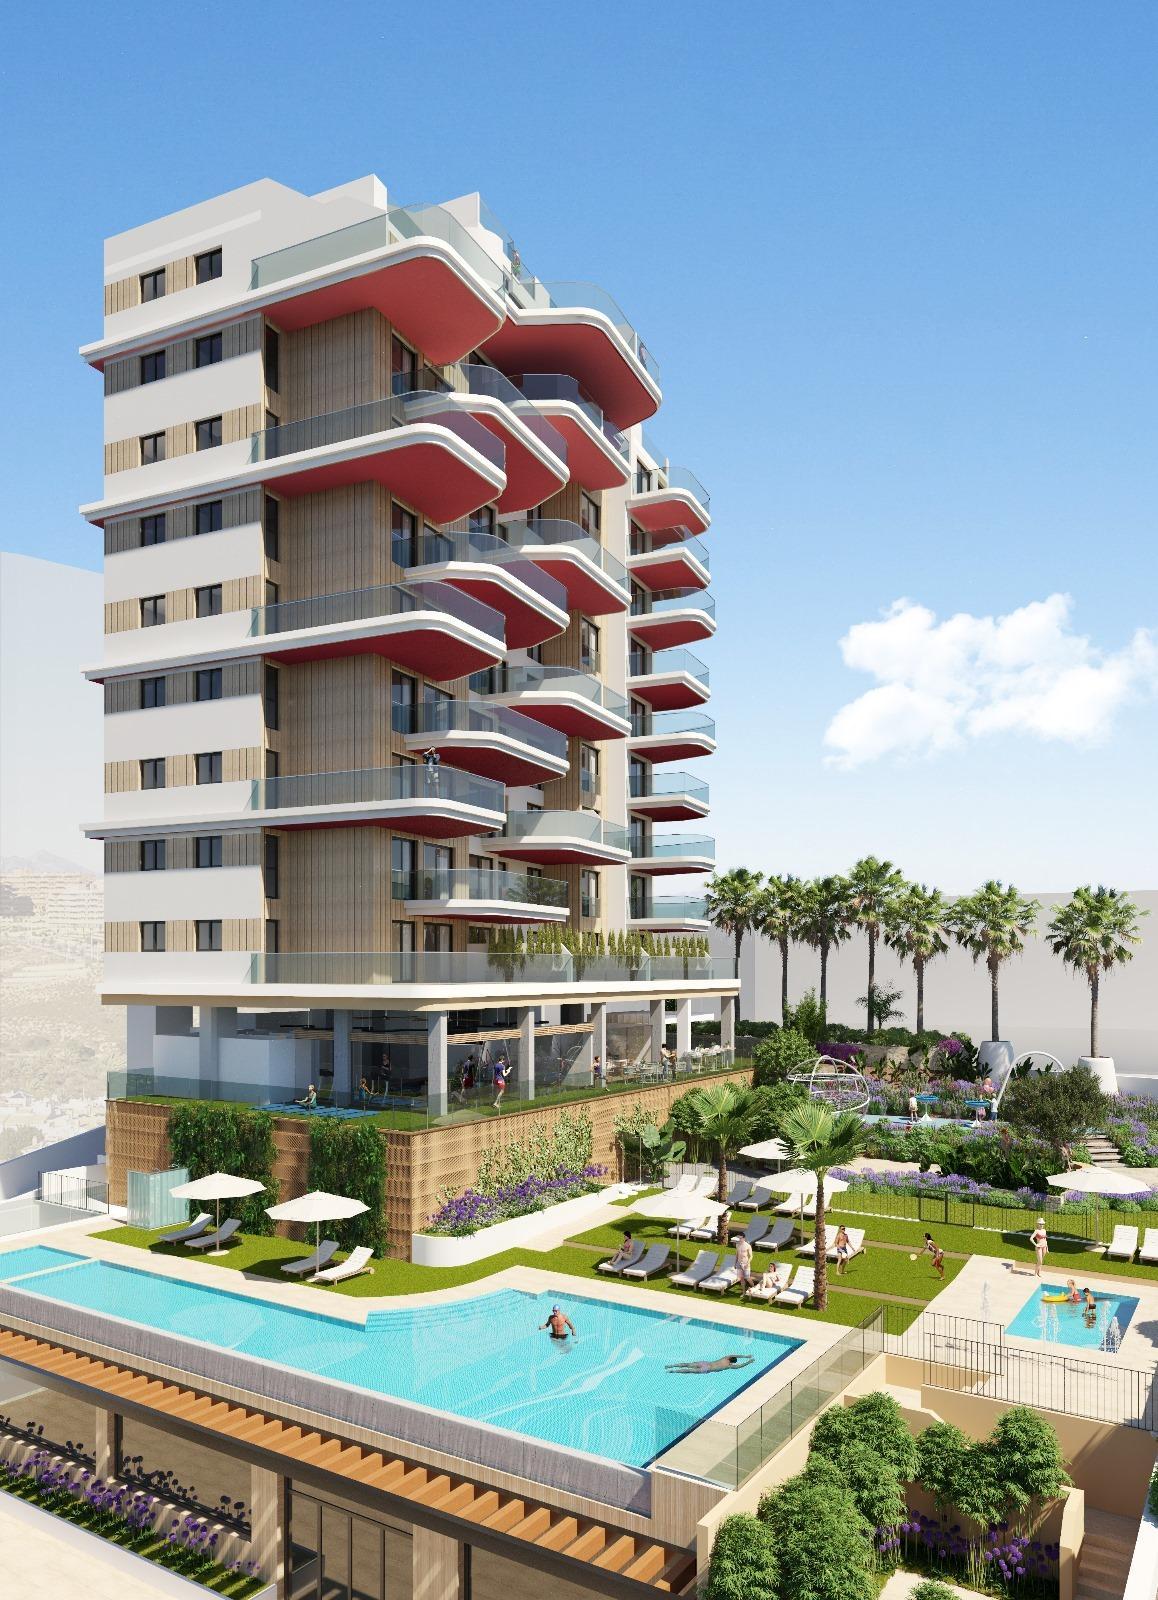 NEW BUILD APARTMENTS IN CALPE

New Build residential complex of aprtments in Calpe.

Modern apartments with 2 and 3 bedrooms, 2 bathrooms, open plan kitchen with living room, fitted wardrobes and terraces.

Some of the properties have sea views.

The common areas have a swimming pool for adults and children, a children’s play area.

Each apartment has a parking space and storage room in the basement.

Calpe, one of the towns of La Marina Alta, lies on the northern coast of the province of Alicante, surrounded by the towns of Altea, Benidorm, Teulada-Moraira, Benissa.

Calpe has a wonderful mixture of old Valencian culture and modern tourist facilities. It is a great base from which to explore the local area or enjoy the many local beaches. Calpe alone has three of the most beautiful sandy beaches on the coast.

Calpe also has two Sailing Clubs: Real Club Náutico de Calpe and Club Náutico de Puerto Blanco.

Fishing village of Calpe now transformed into a tourist magnet, the town sits in an ideal location, easily accessed by the A7 motorway and the N332 that runs from Valencia to Alicante; its approximately 1 hour drive from the airport at Alicante and 1,5 hours to Valencias airport.